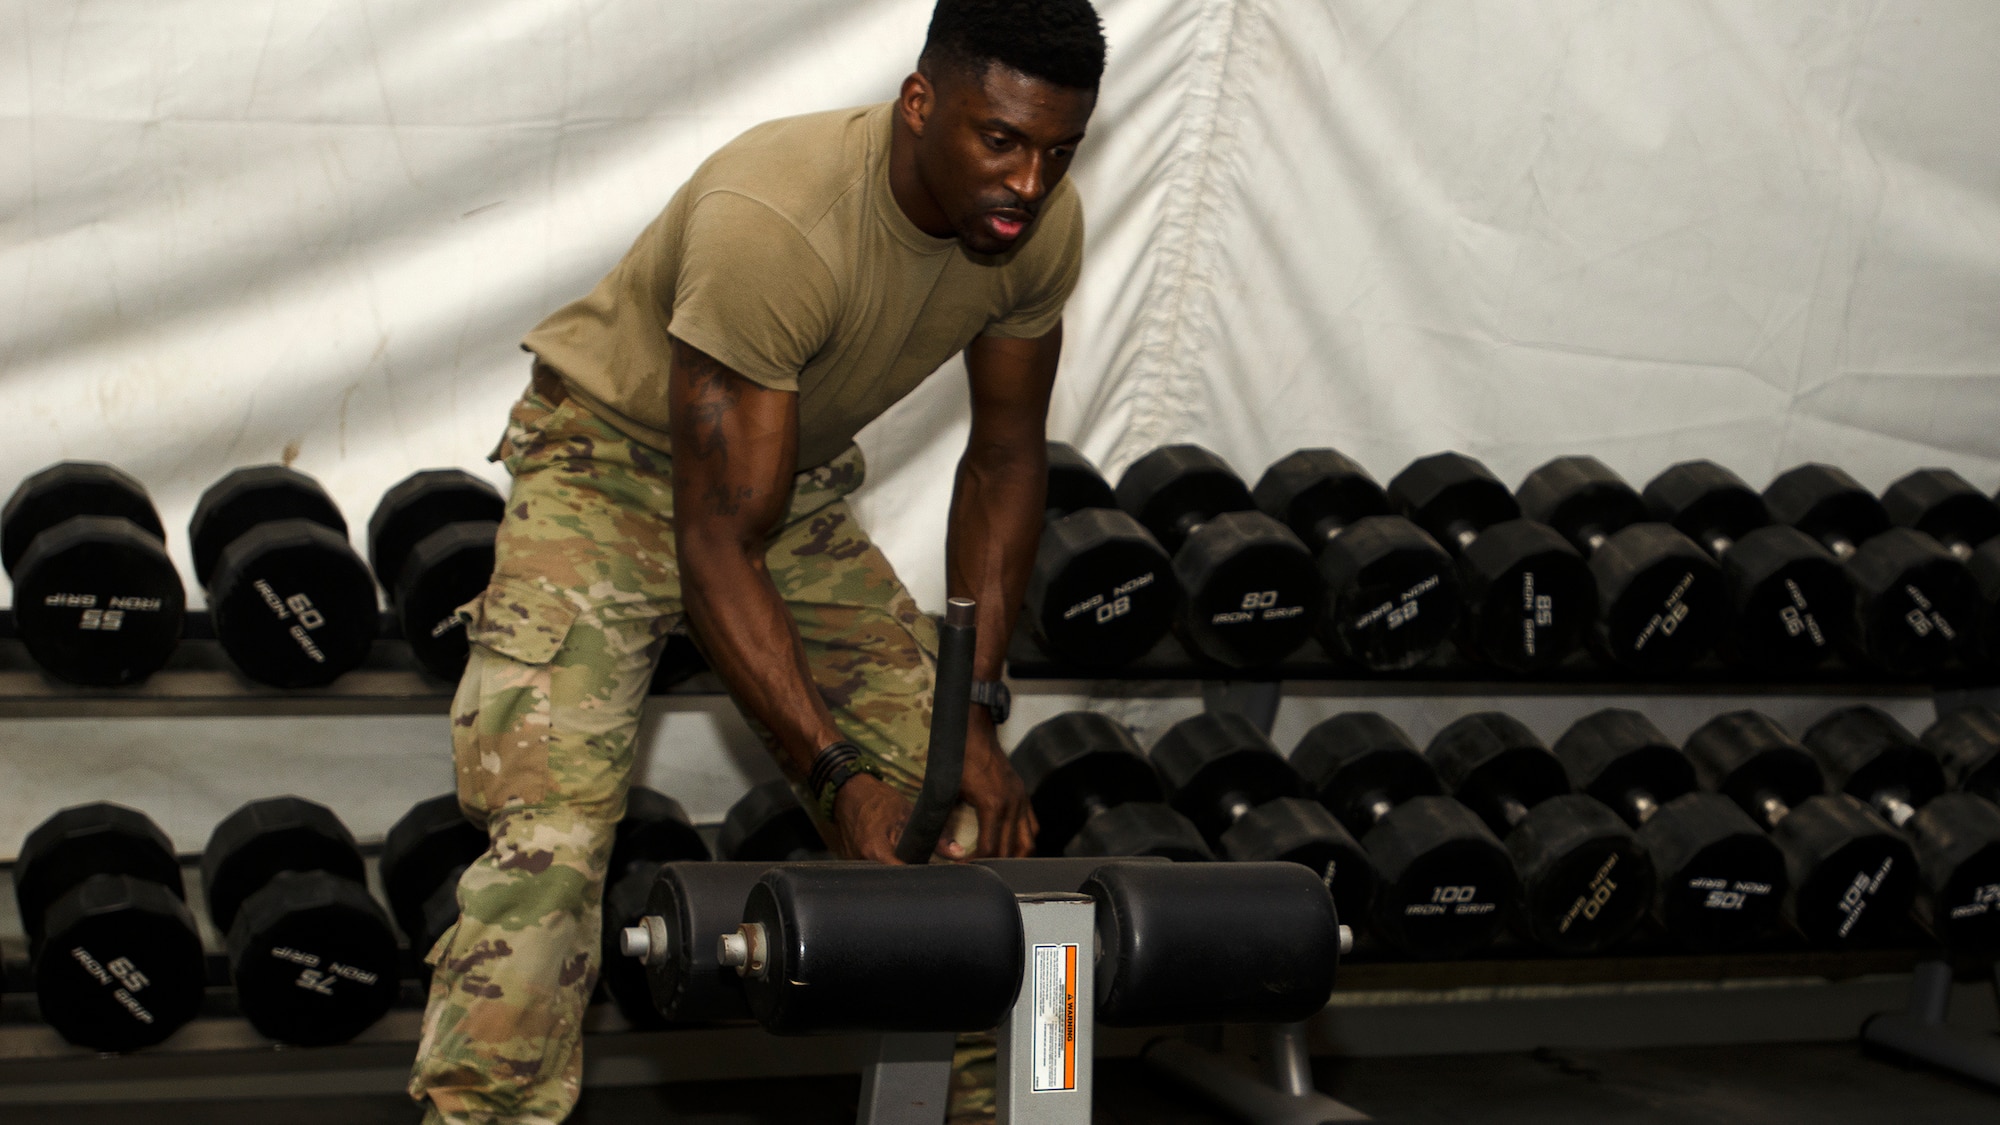 U.S. Air Force Master Sgt. Alonza Loury, 386th Expeditionary Force Support Squadron, moves workout equipment in the new fitness tent on Ali Al Salem Air Base, Kuwait, July 24, 2019. The new fitness tent is slated to open Aug.1, 2019, replacing the original facility which is scheduled for demolition to make room for future base improvement projects. This facility offers Airmen a second fitness location and expected to be in use until mid-November when the more permanent structure is completed. (U.S. Air Force photo by Capt. Stephen Hudson)